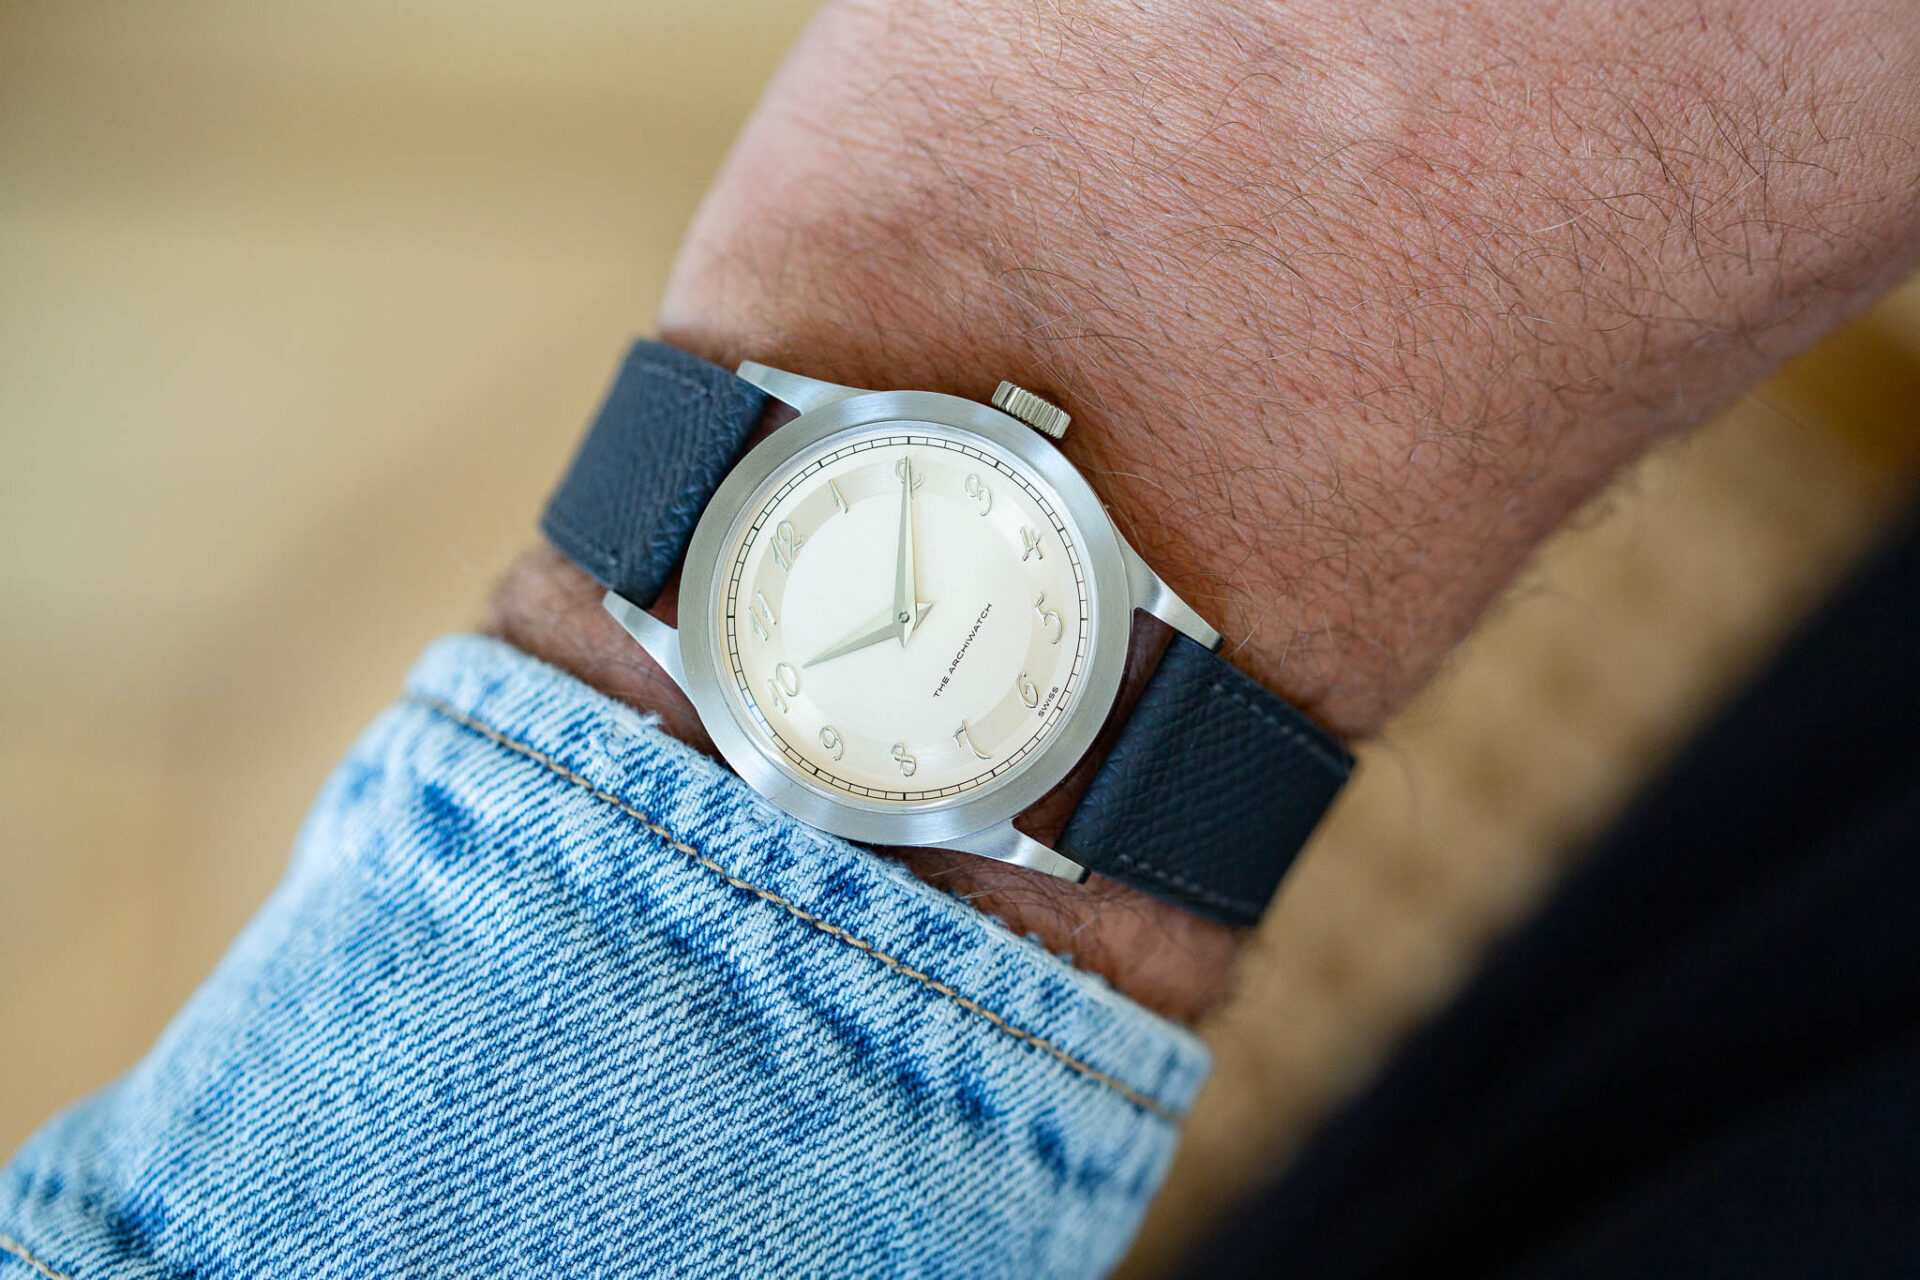 The Archiwatch Classic Two-Tone 2510-4